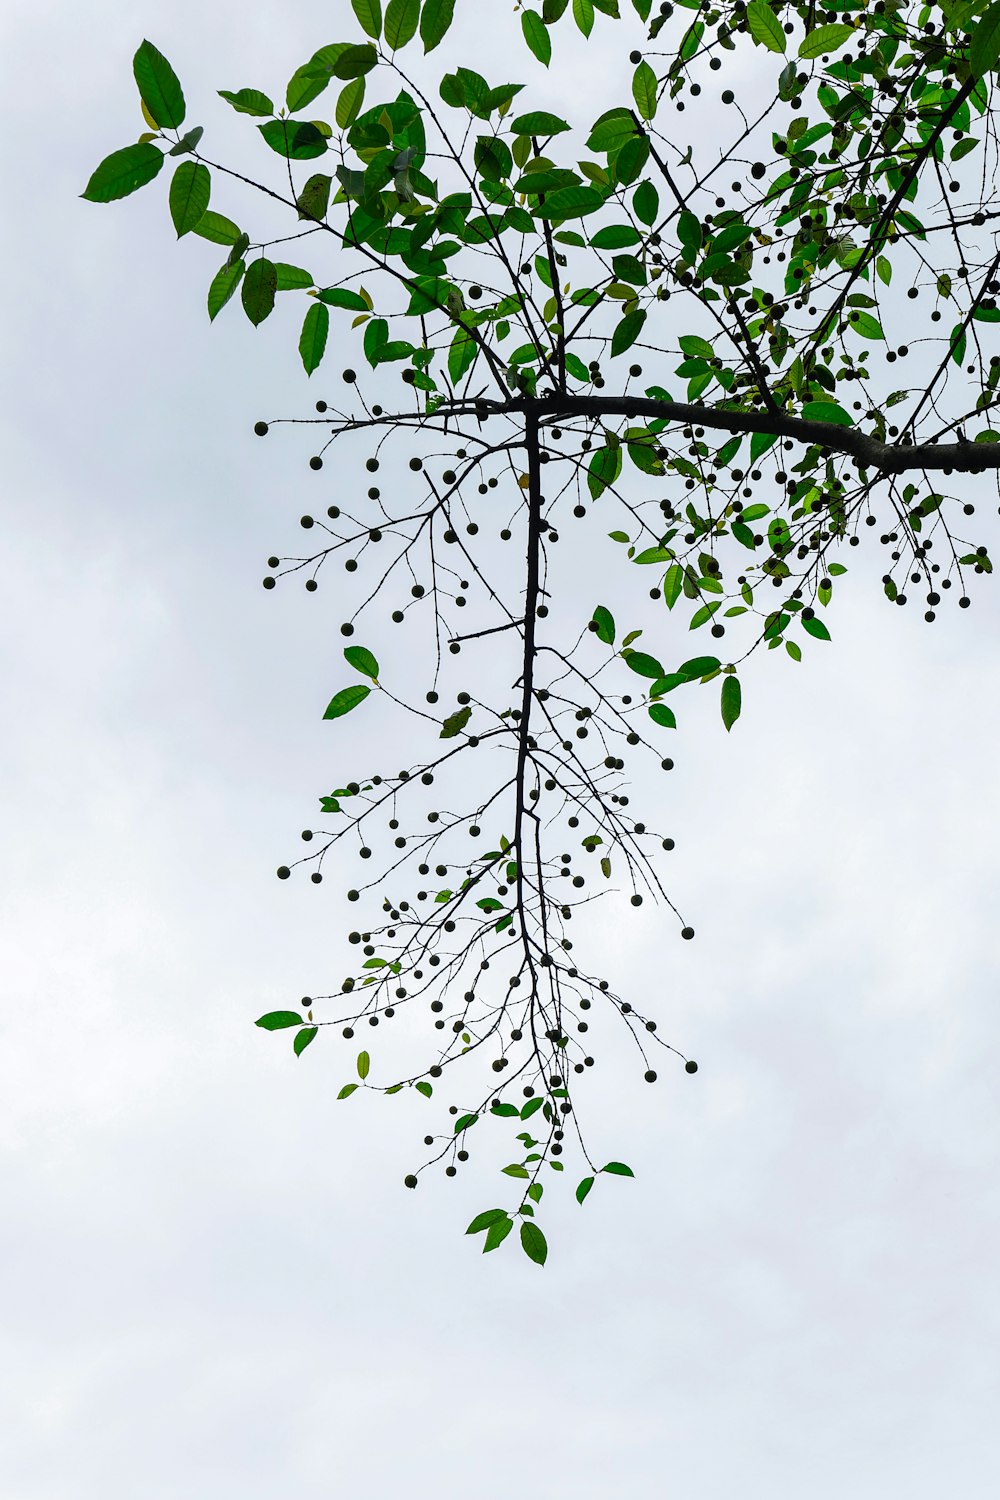 a tree branch with green leaves against a cloudy sky